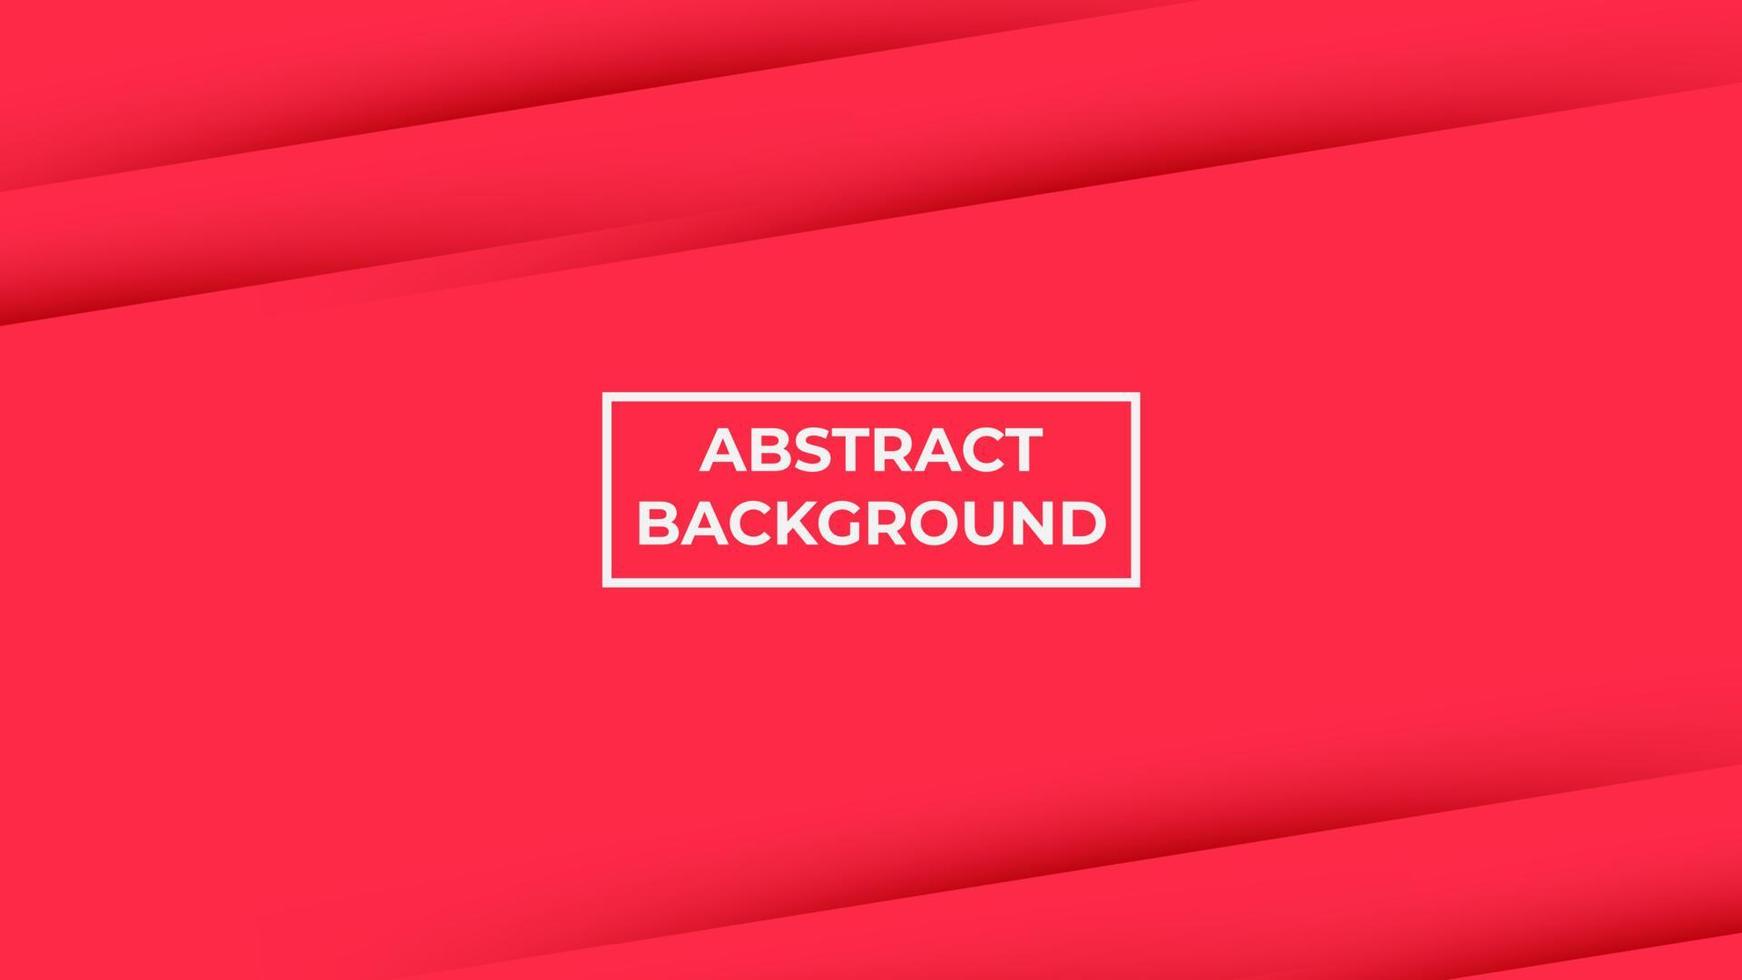 Abstract background. easy to edit vector